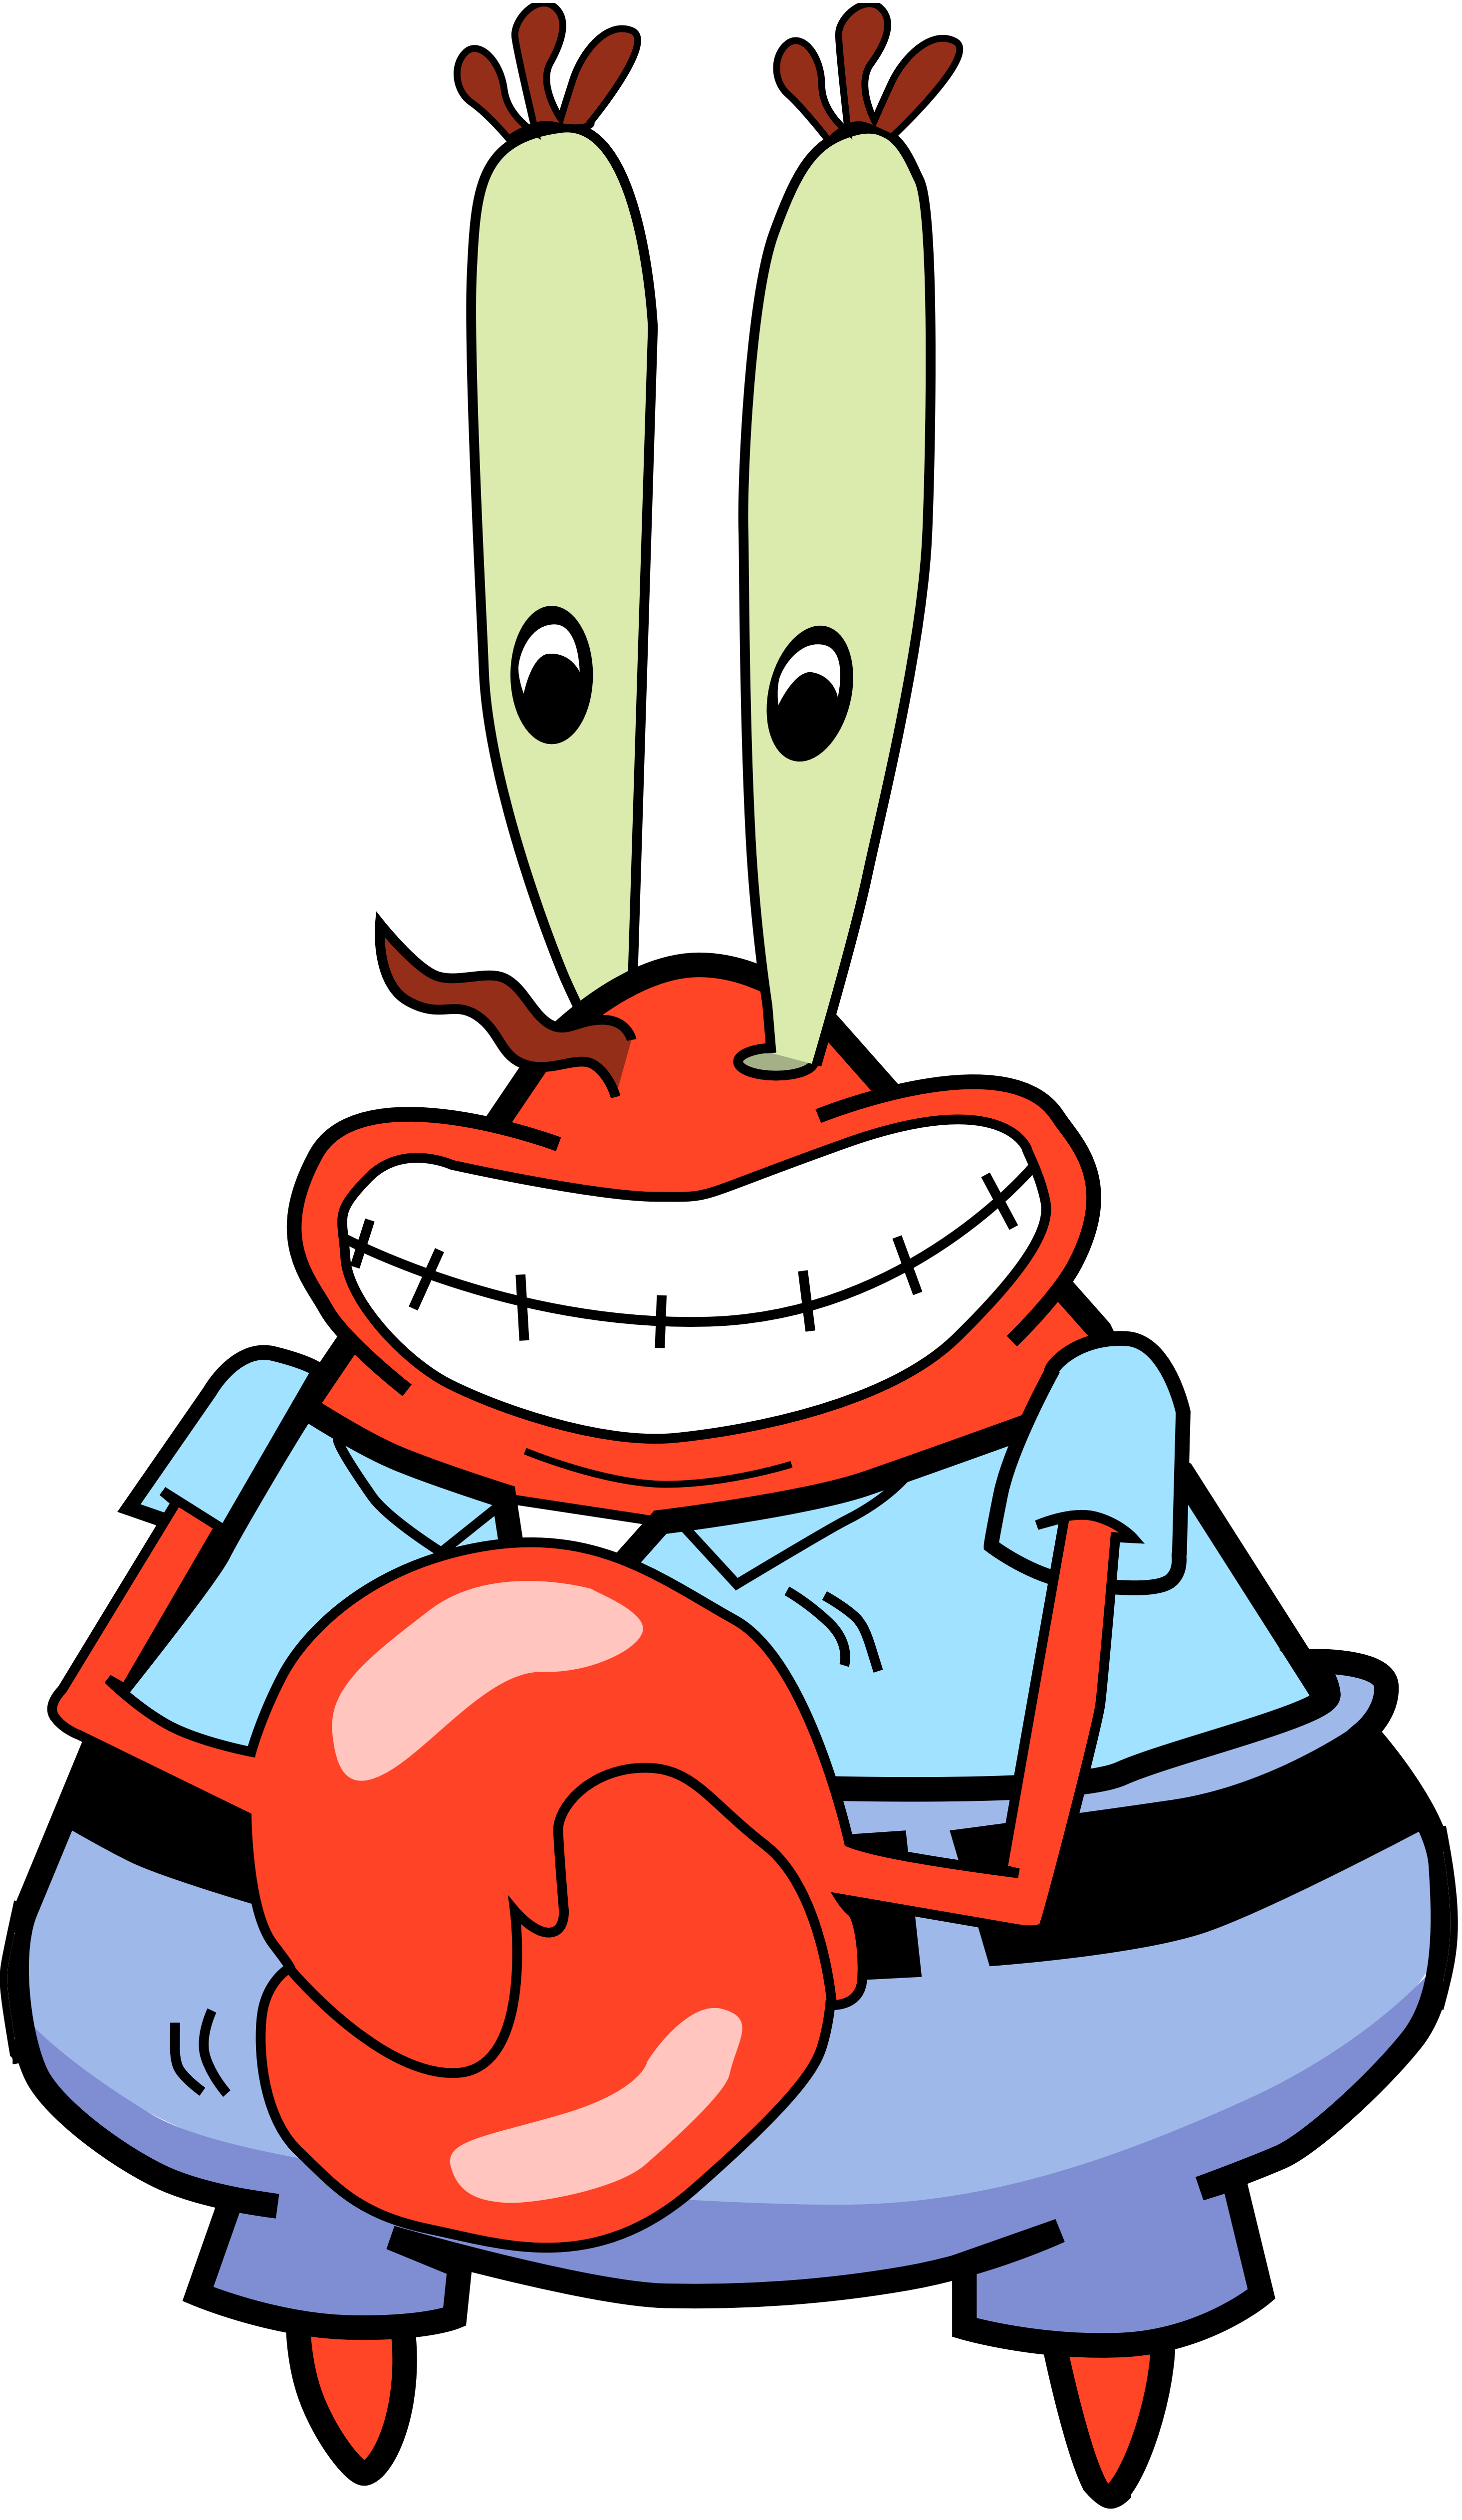 Mister Krabs picture.